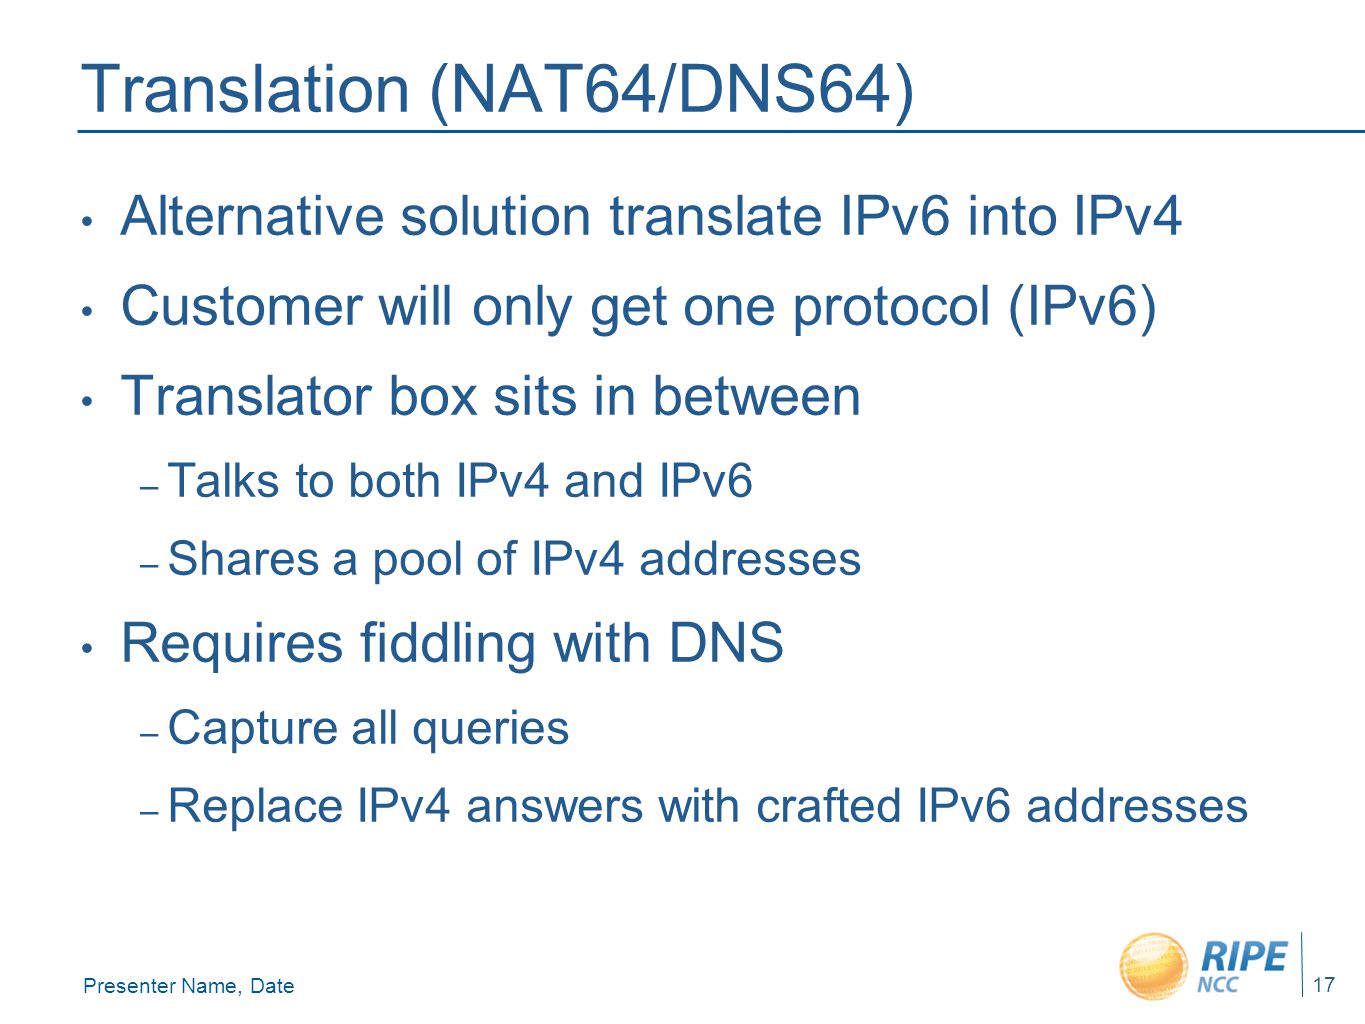 Presenter Name, Date 17 Translation (NAT64/DNS64) Alternative solution translate IPv6 into IPv4 Customer will only get one protocol (IPv6) Translator box sits in between – Talks to both IPv4 and IPv6 – Shares a pool of IPv4 addresses Requires fiddling with DNS – Capture all queries – Replace IPv4 answers with crafted IPv6 addresses